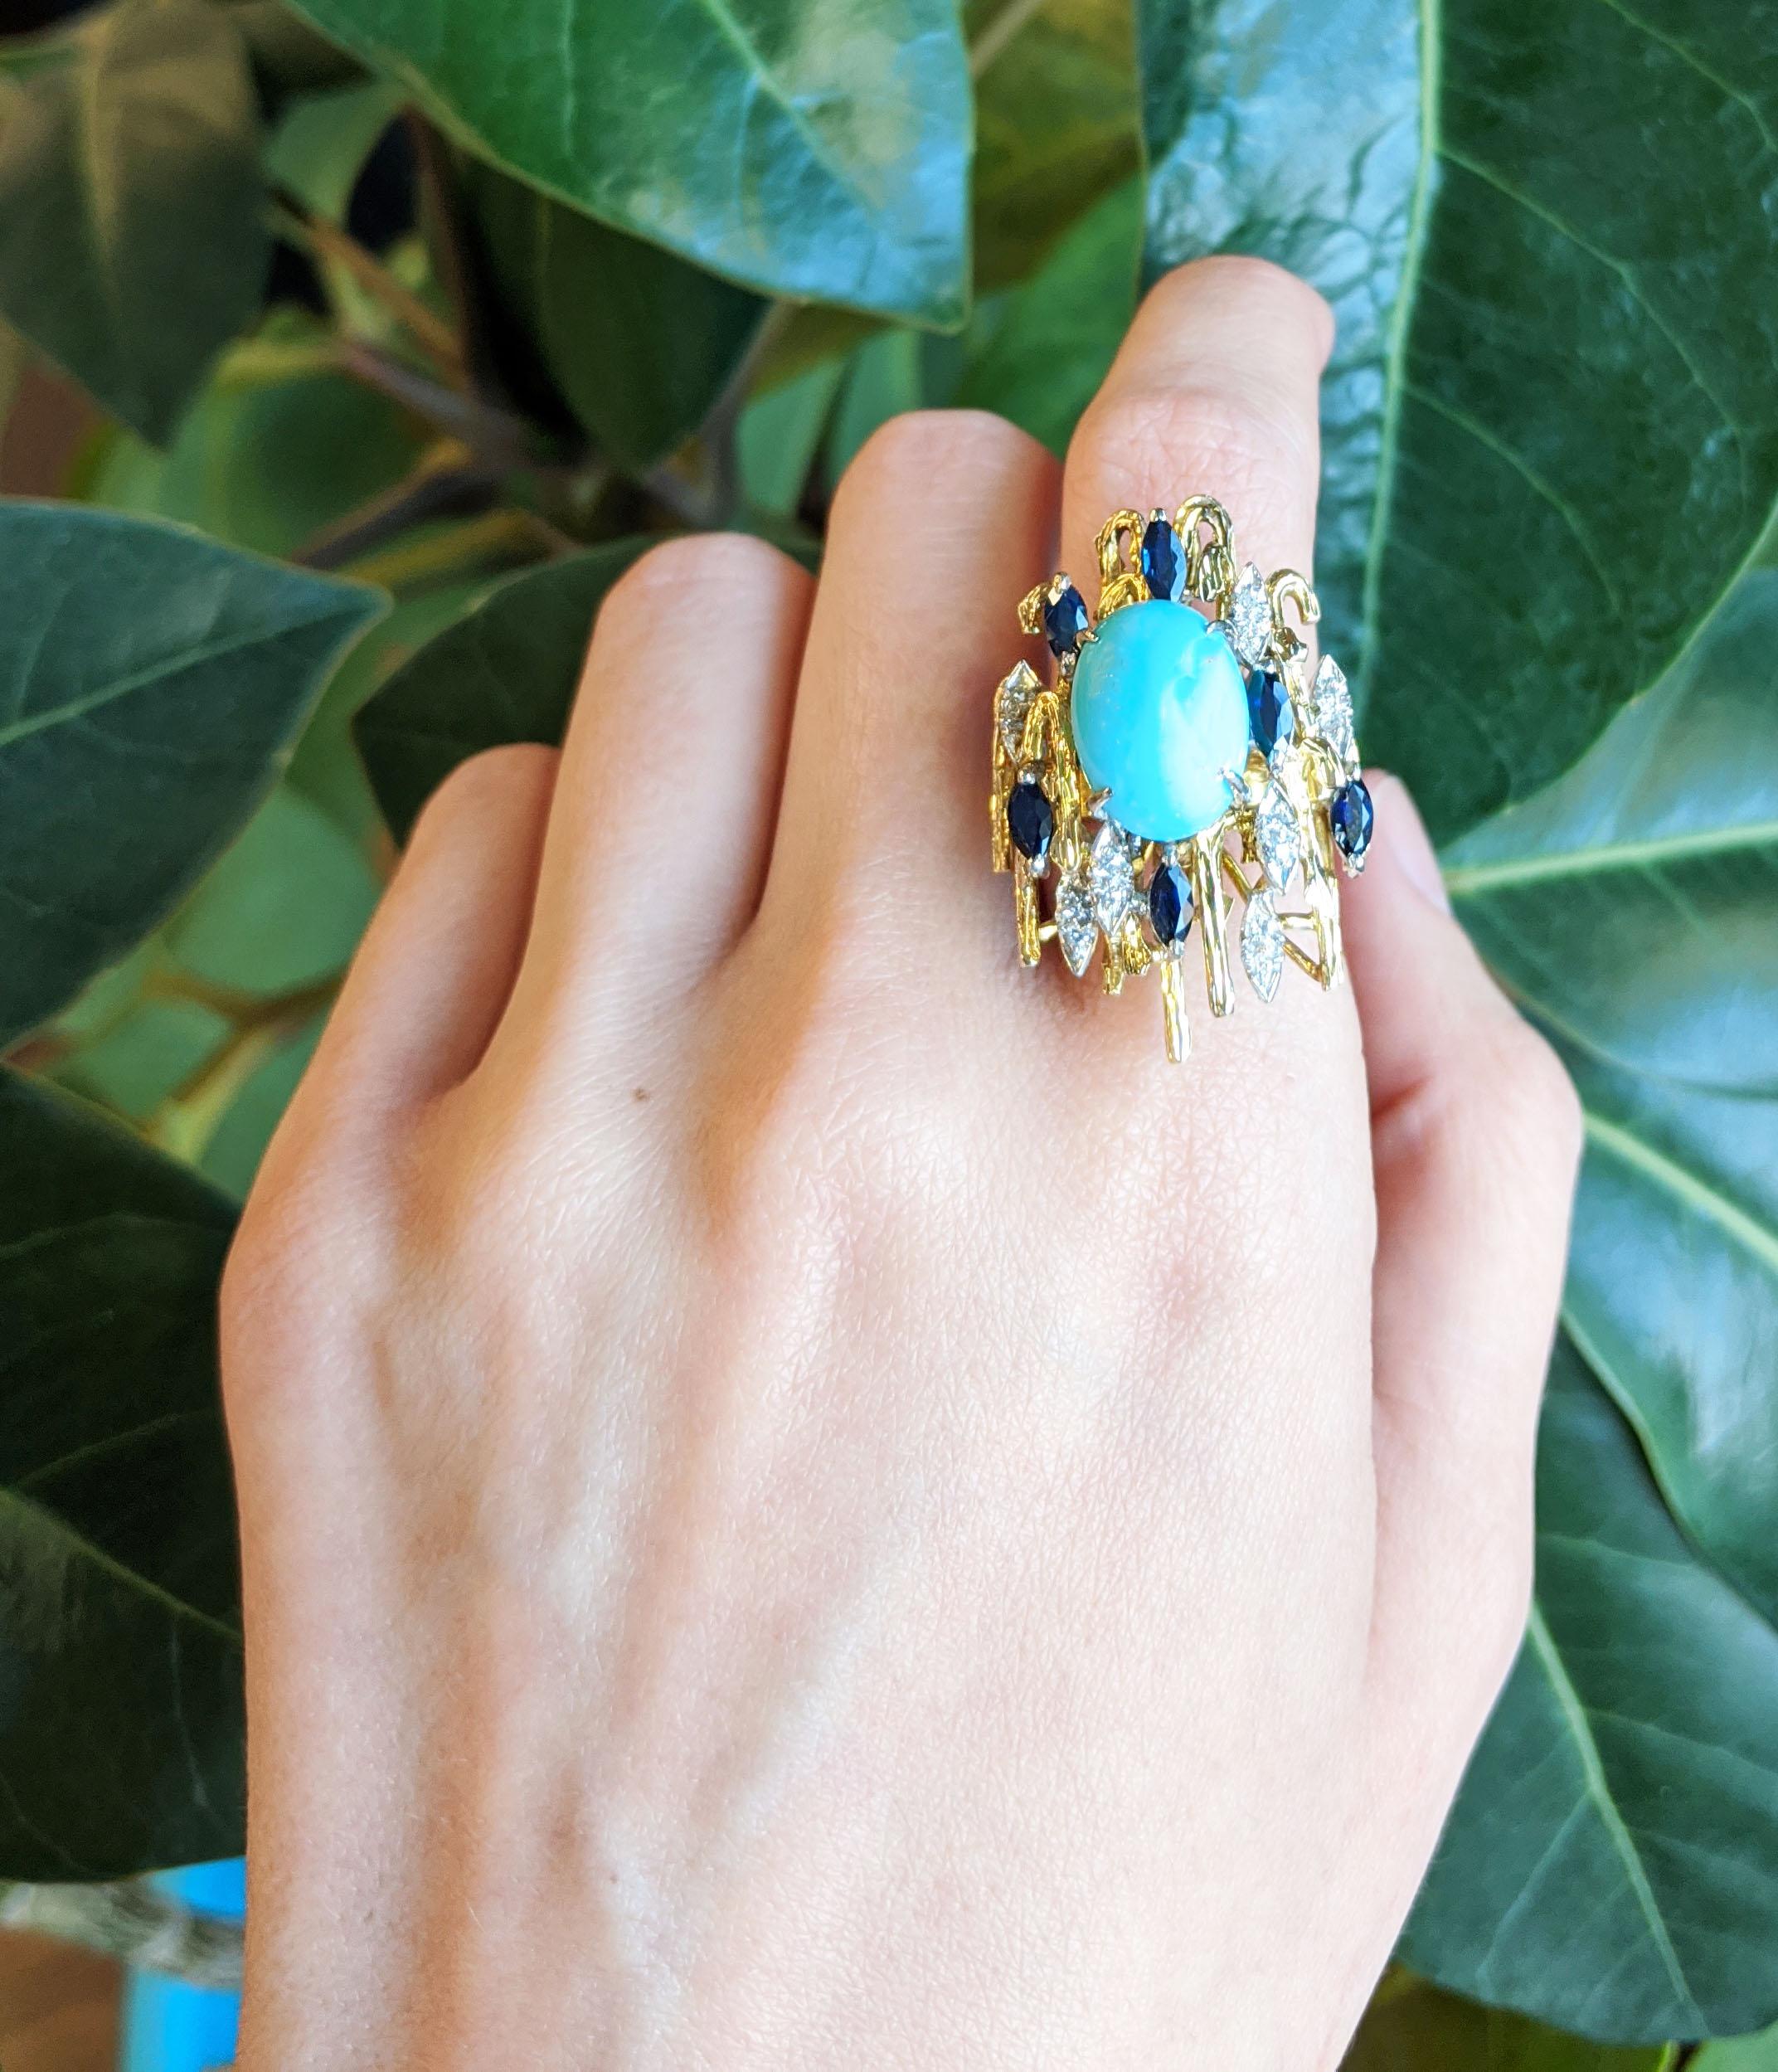 With its stunning Persian turquoise center, diamond and sapphire accents, and bold, architectural design, this 18k two-tone gold mid-century statement ring is unlike anything you will see! The architectural design is reminiscent of Frank Lloyd